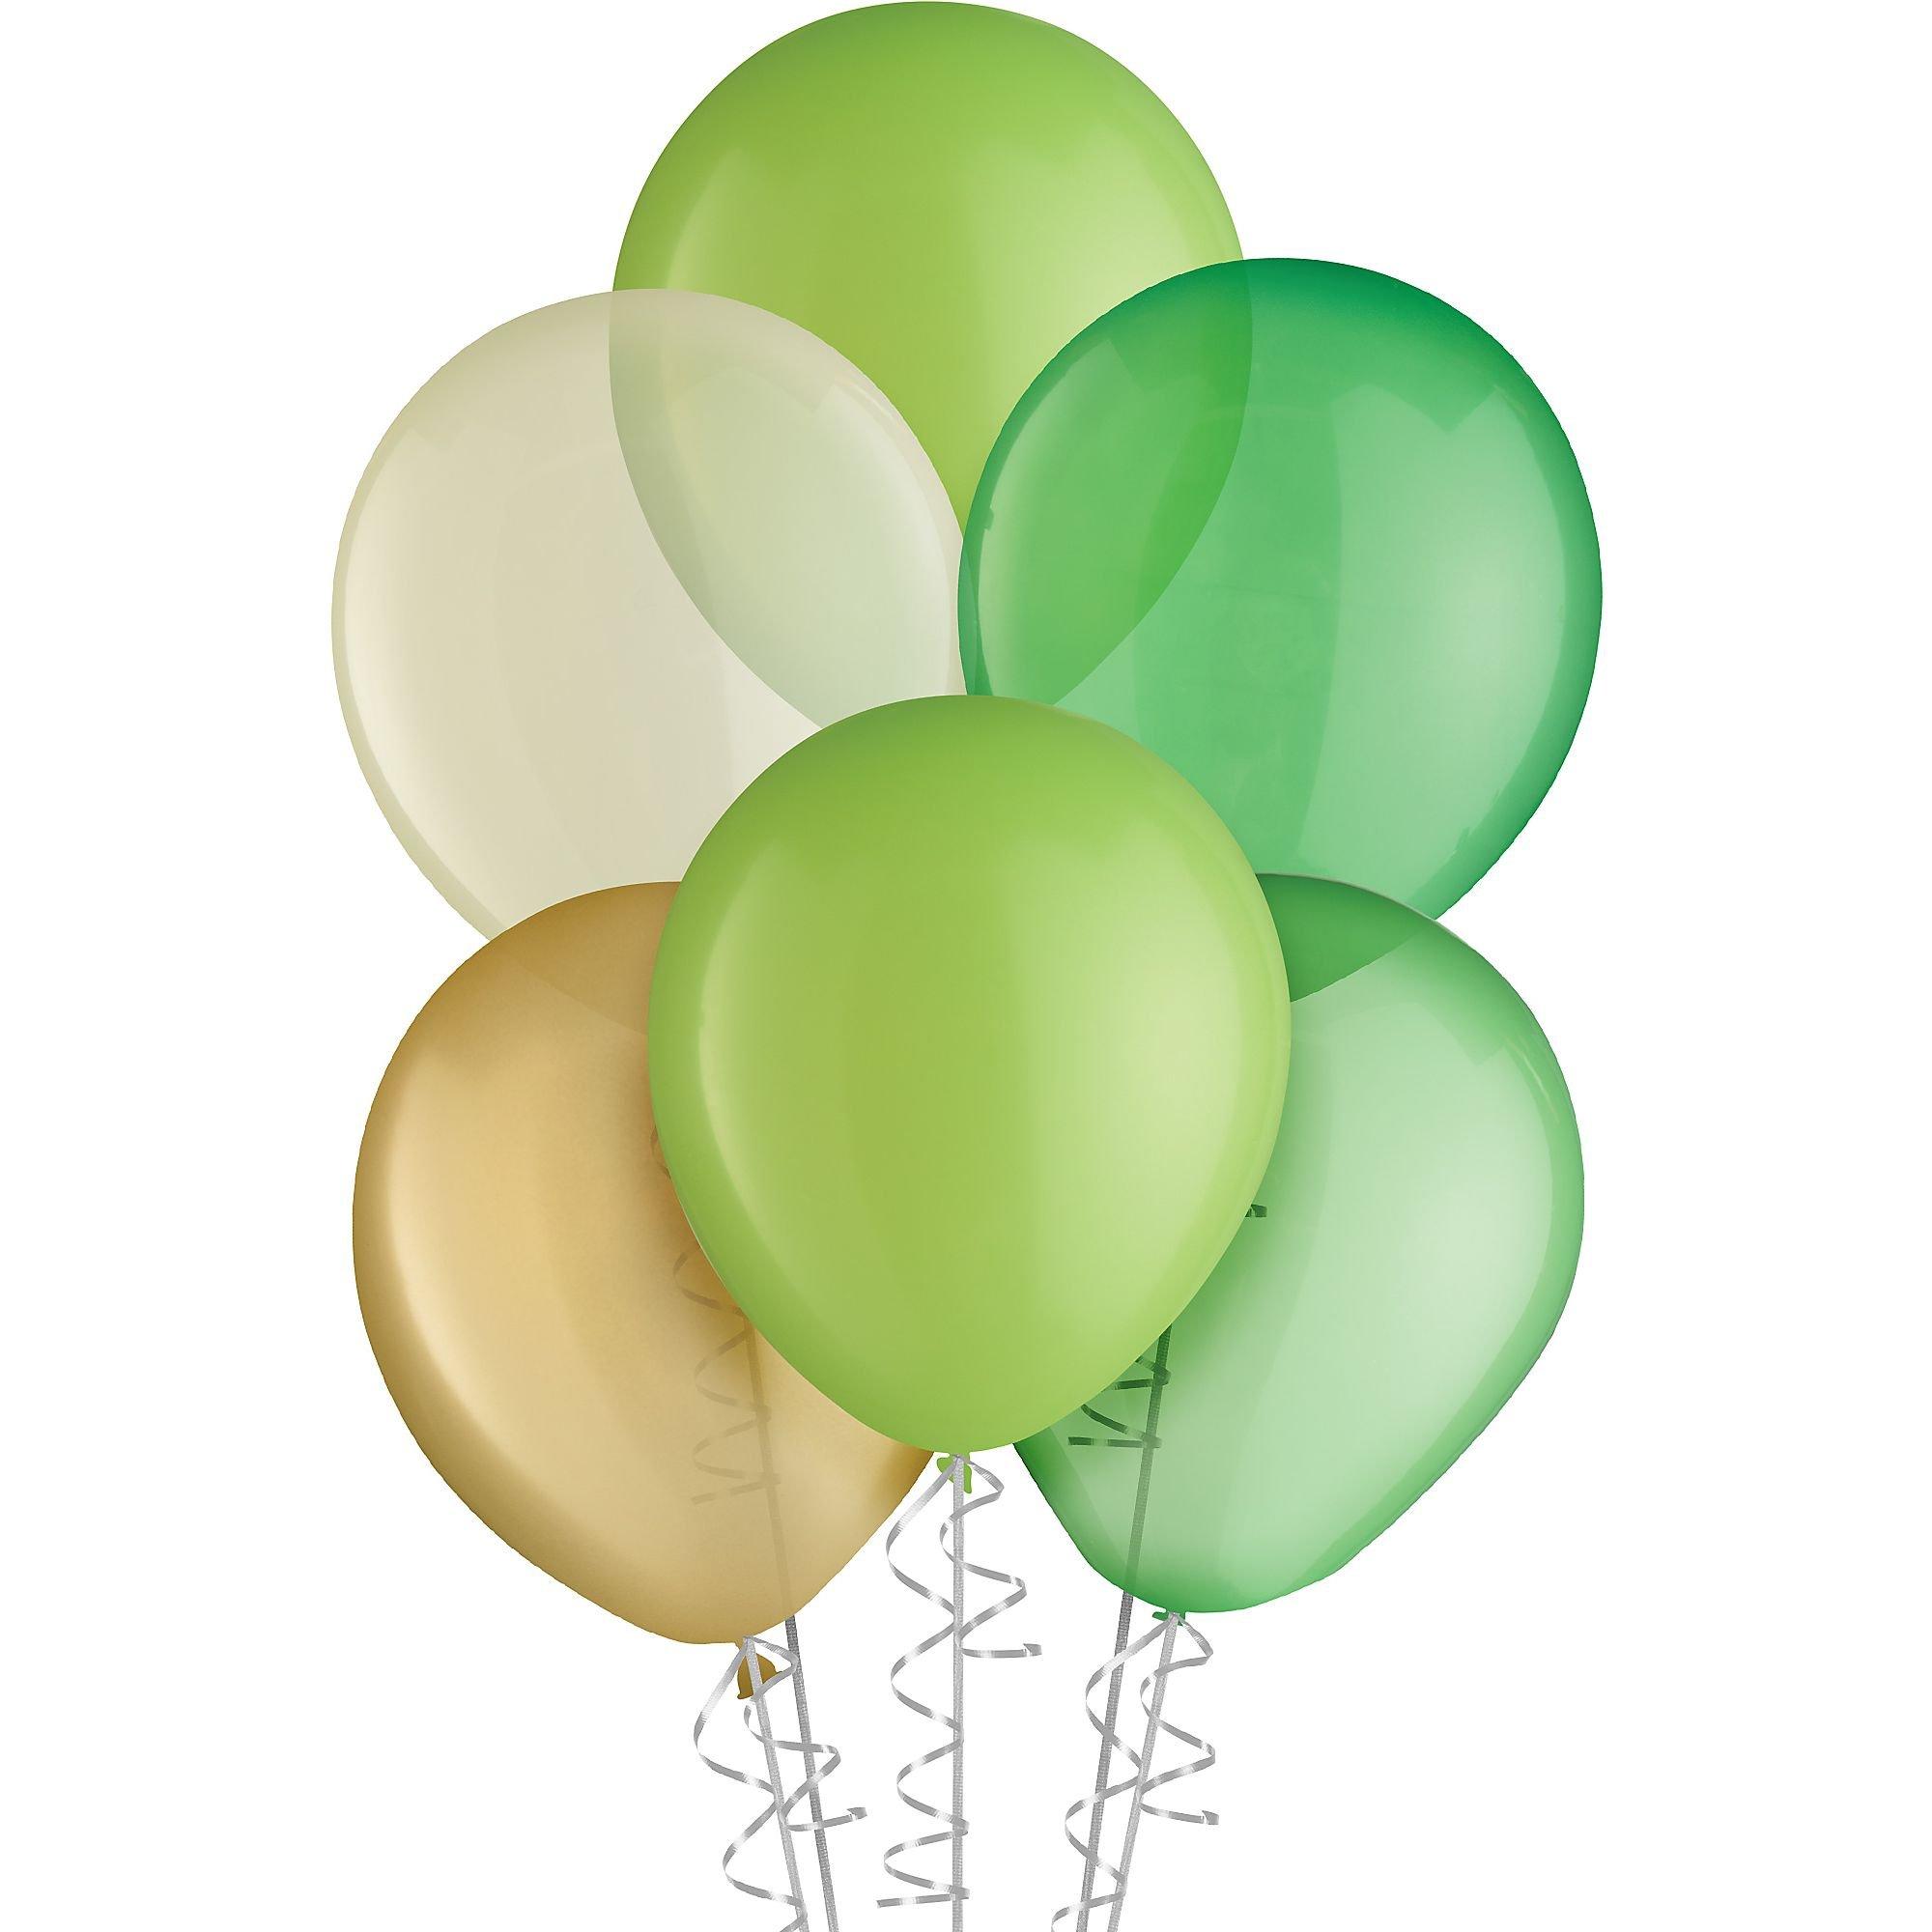 15ct, 11in, Natural 5-Color Mix Latex Balloons - Greens, Gold & White